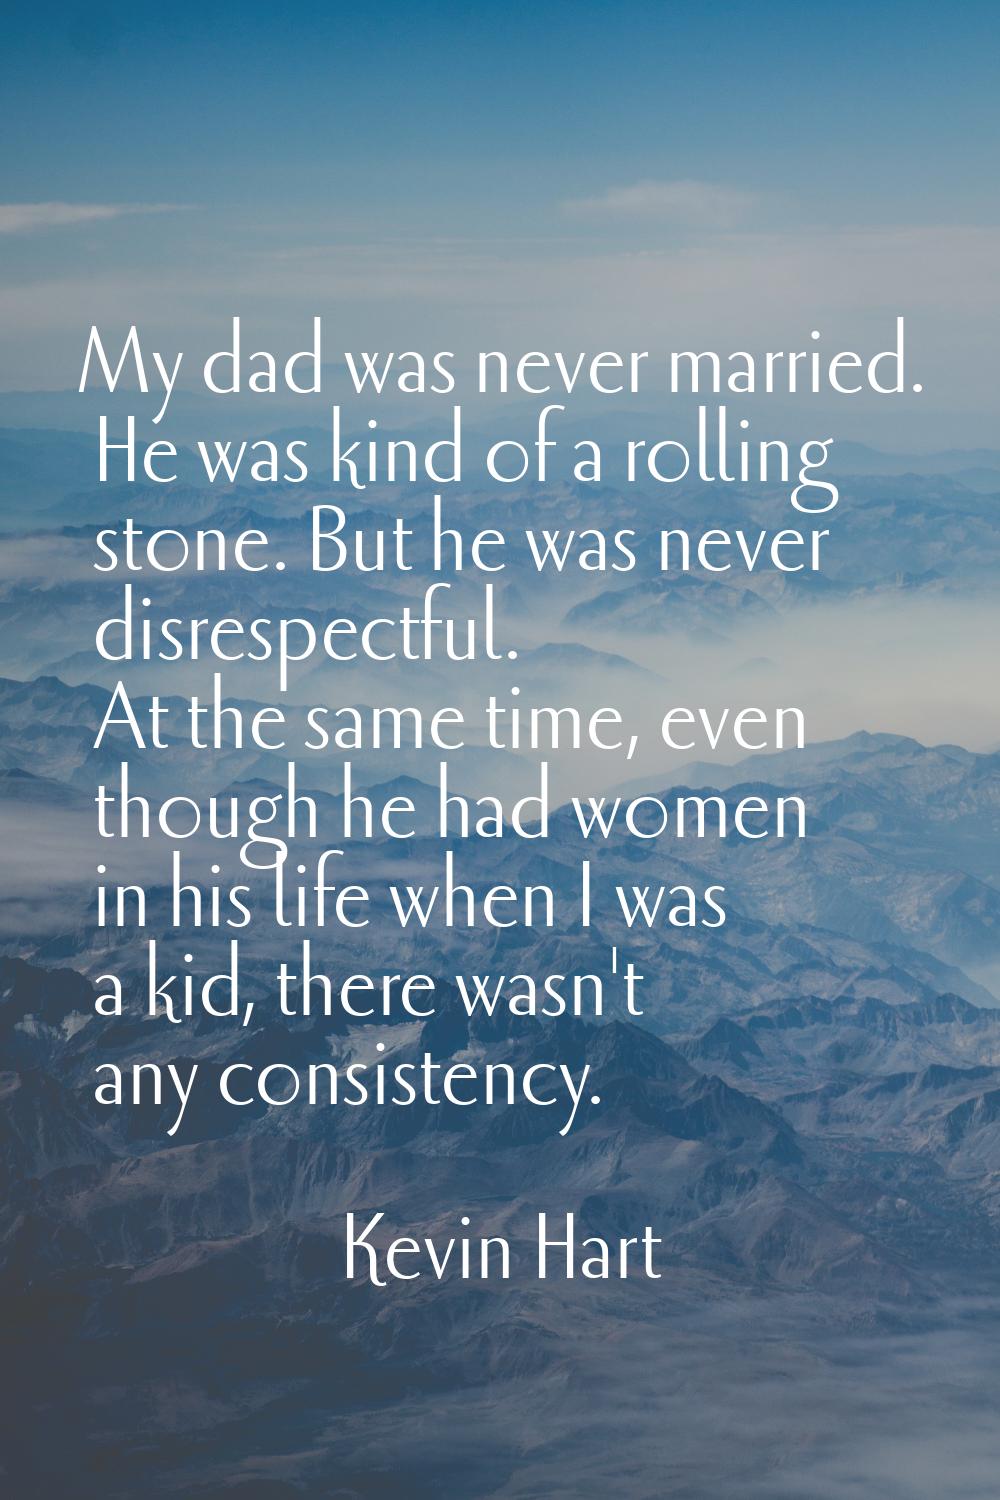 My dad was never married. He was kind of a rolling stone. But he was never disrespectful. At the sa